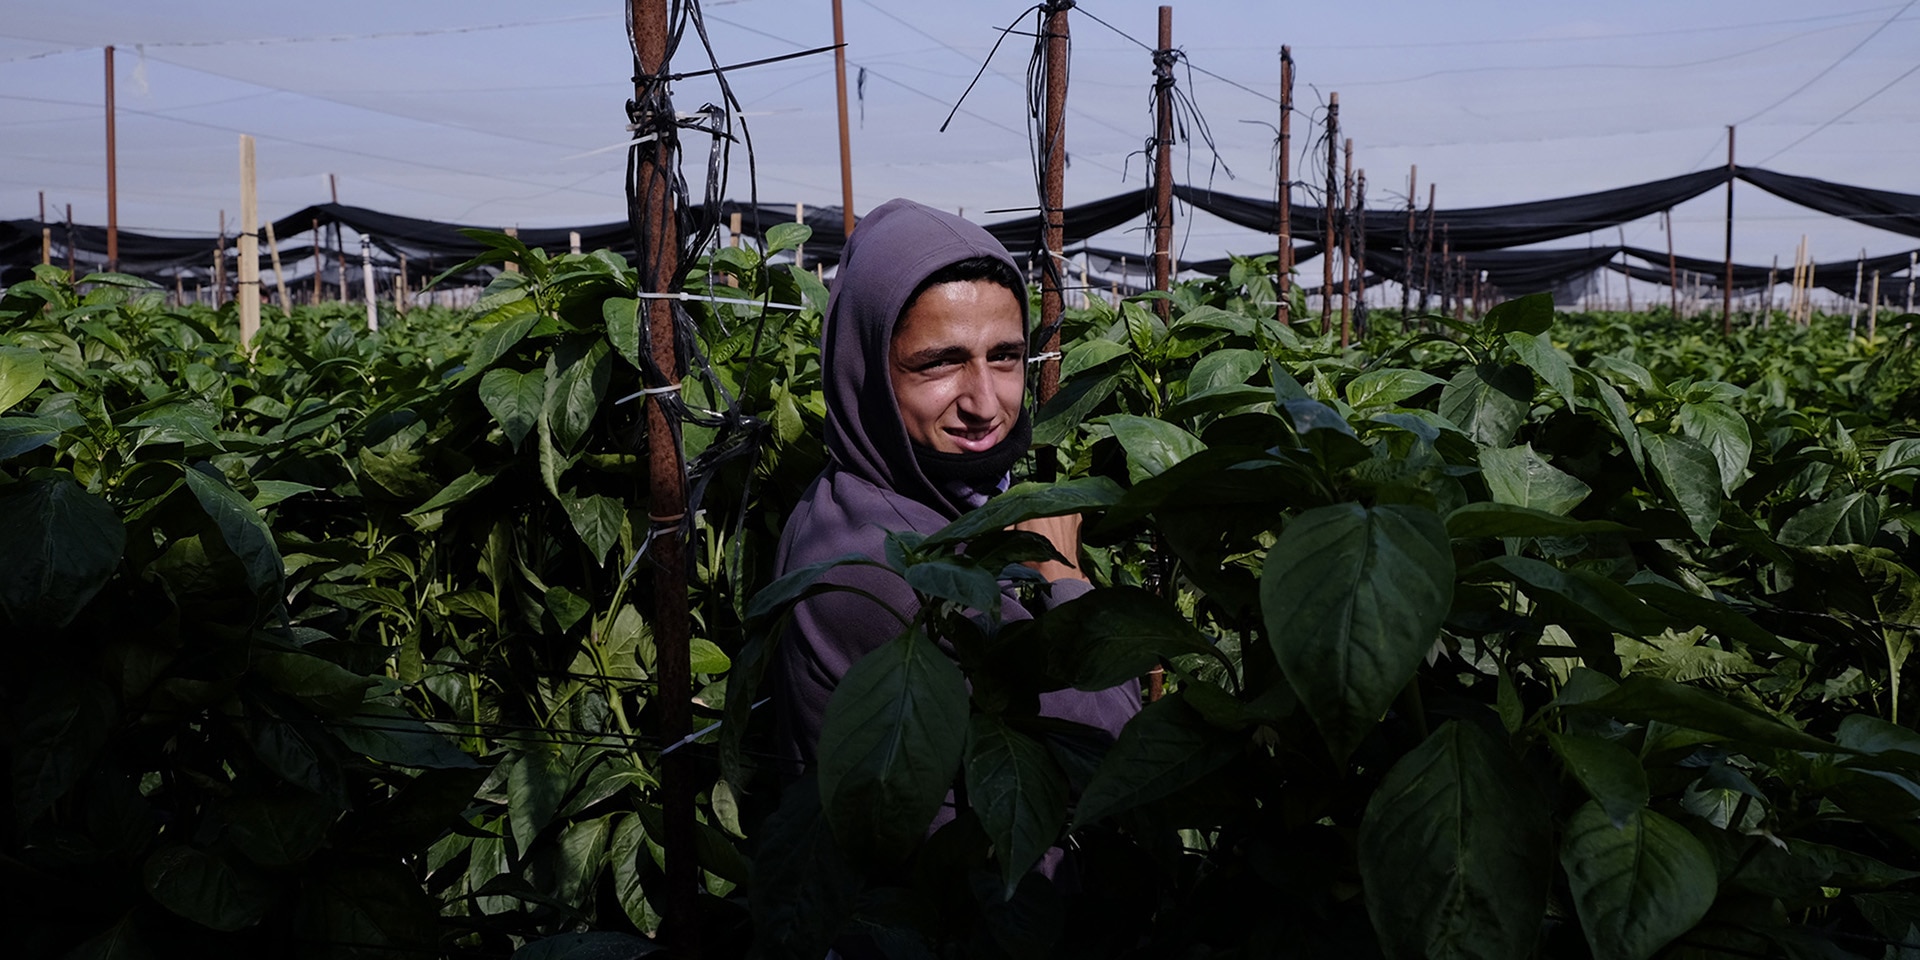 A female worker stands in an Israeli greenhouse that produces peppers for export.